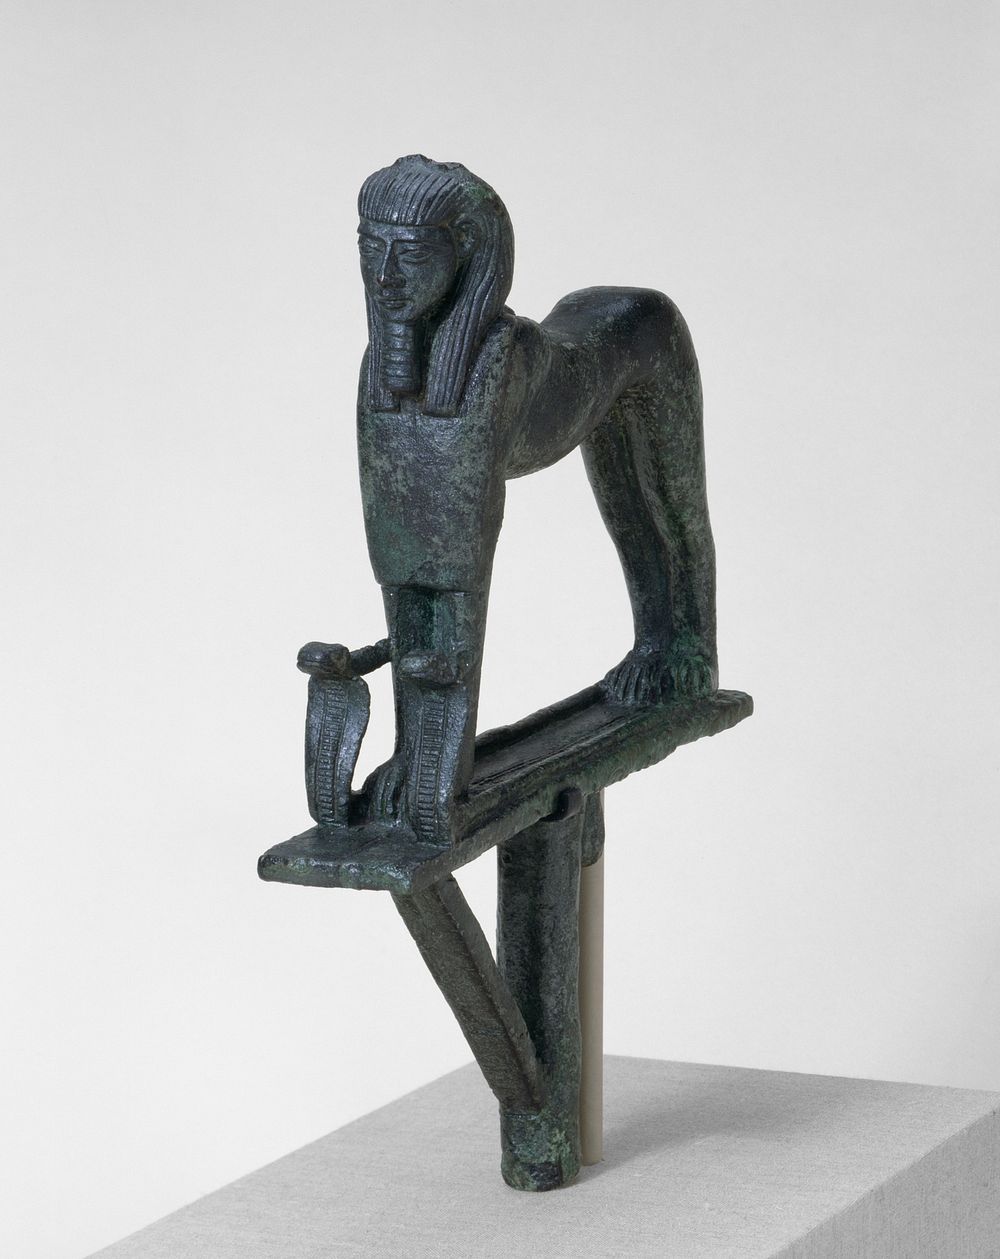 Statuette of a Sphinx from a Barque Standard by Ancient Egyptian